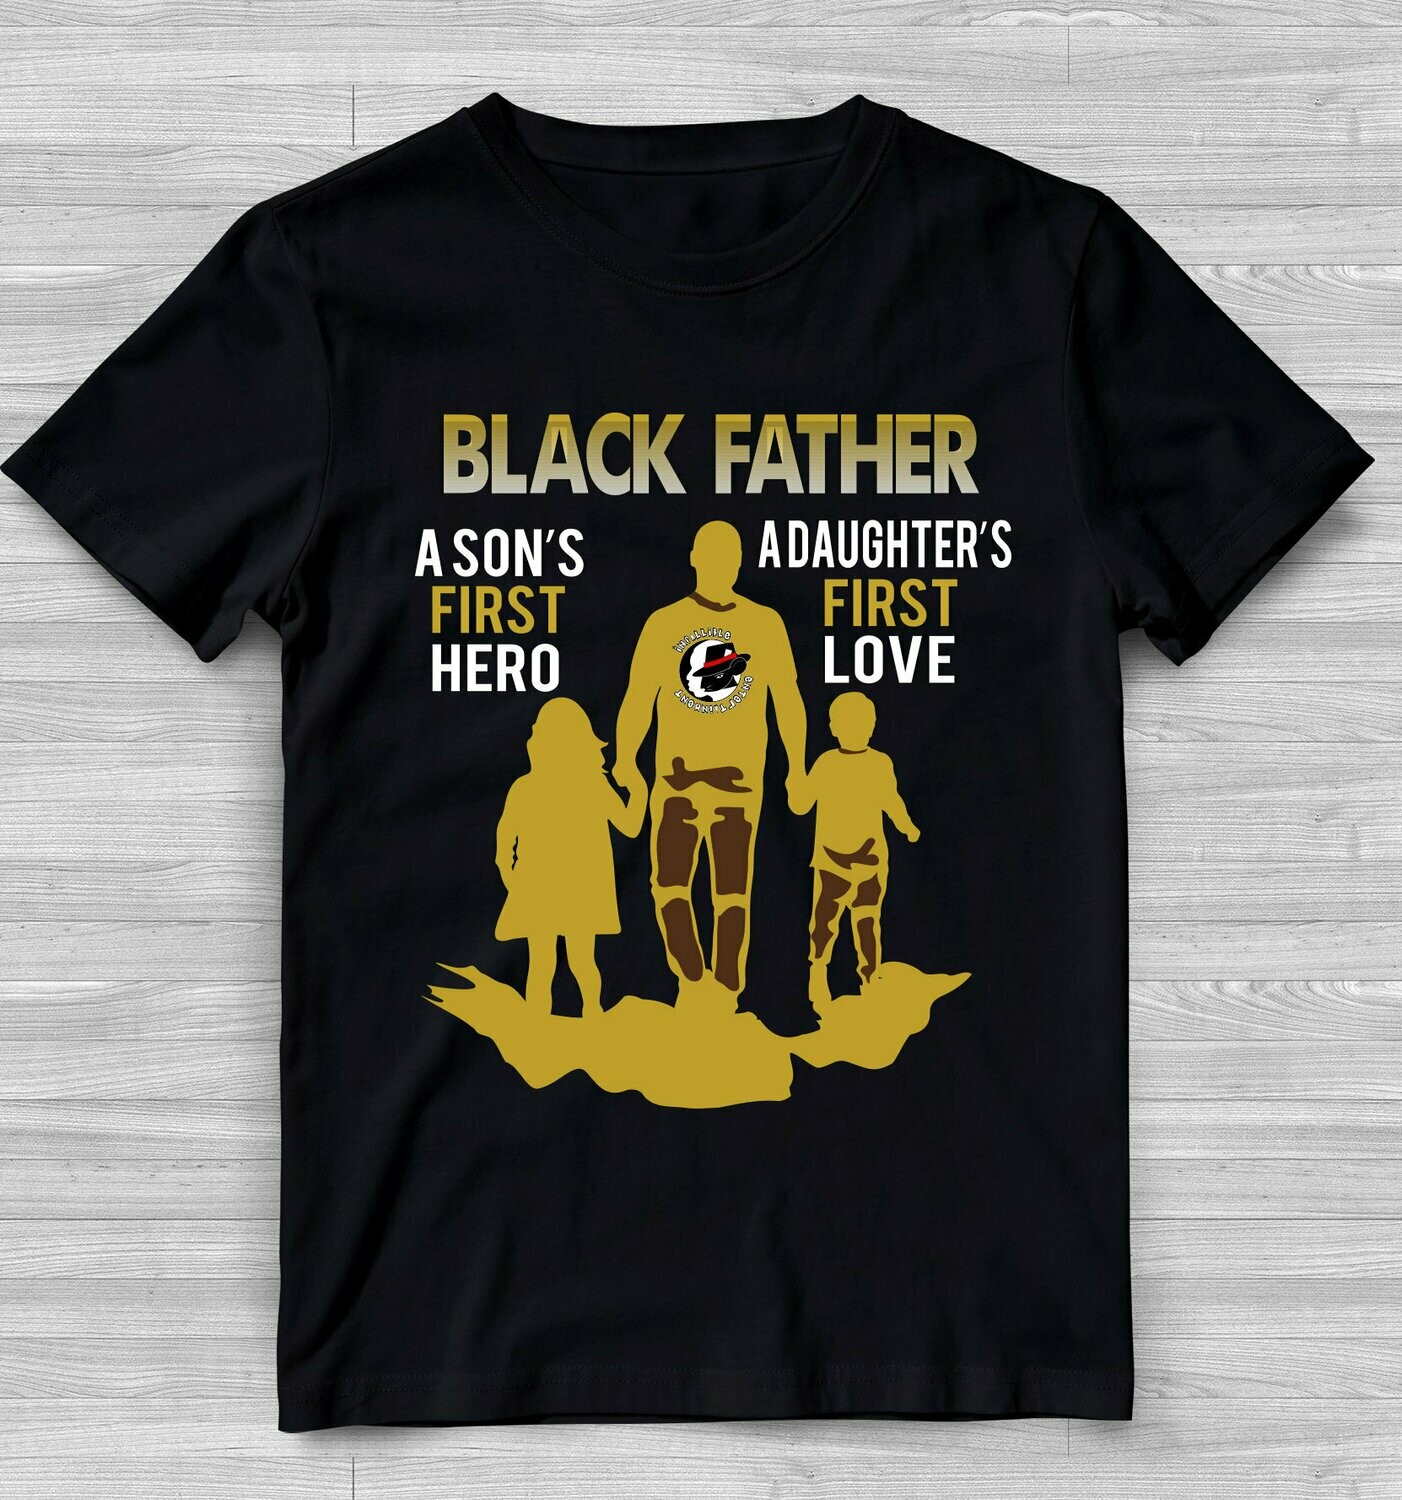 Black Fathers Are Real: We Do Exist: Son & Daughter Influence T-Shirt